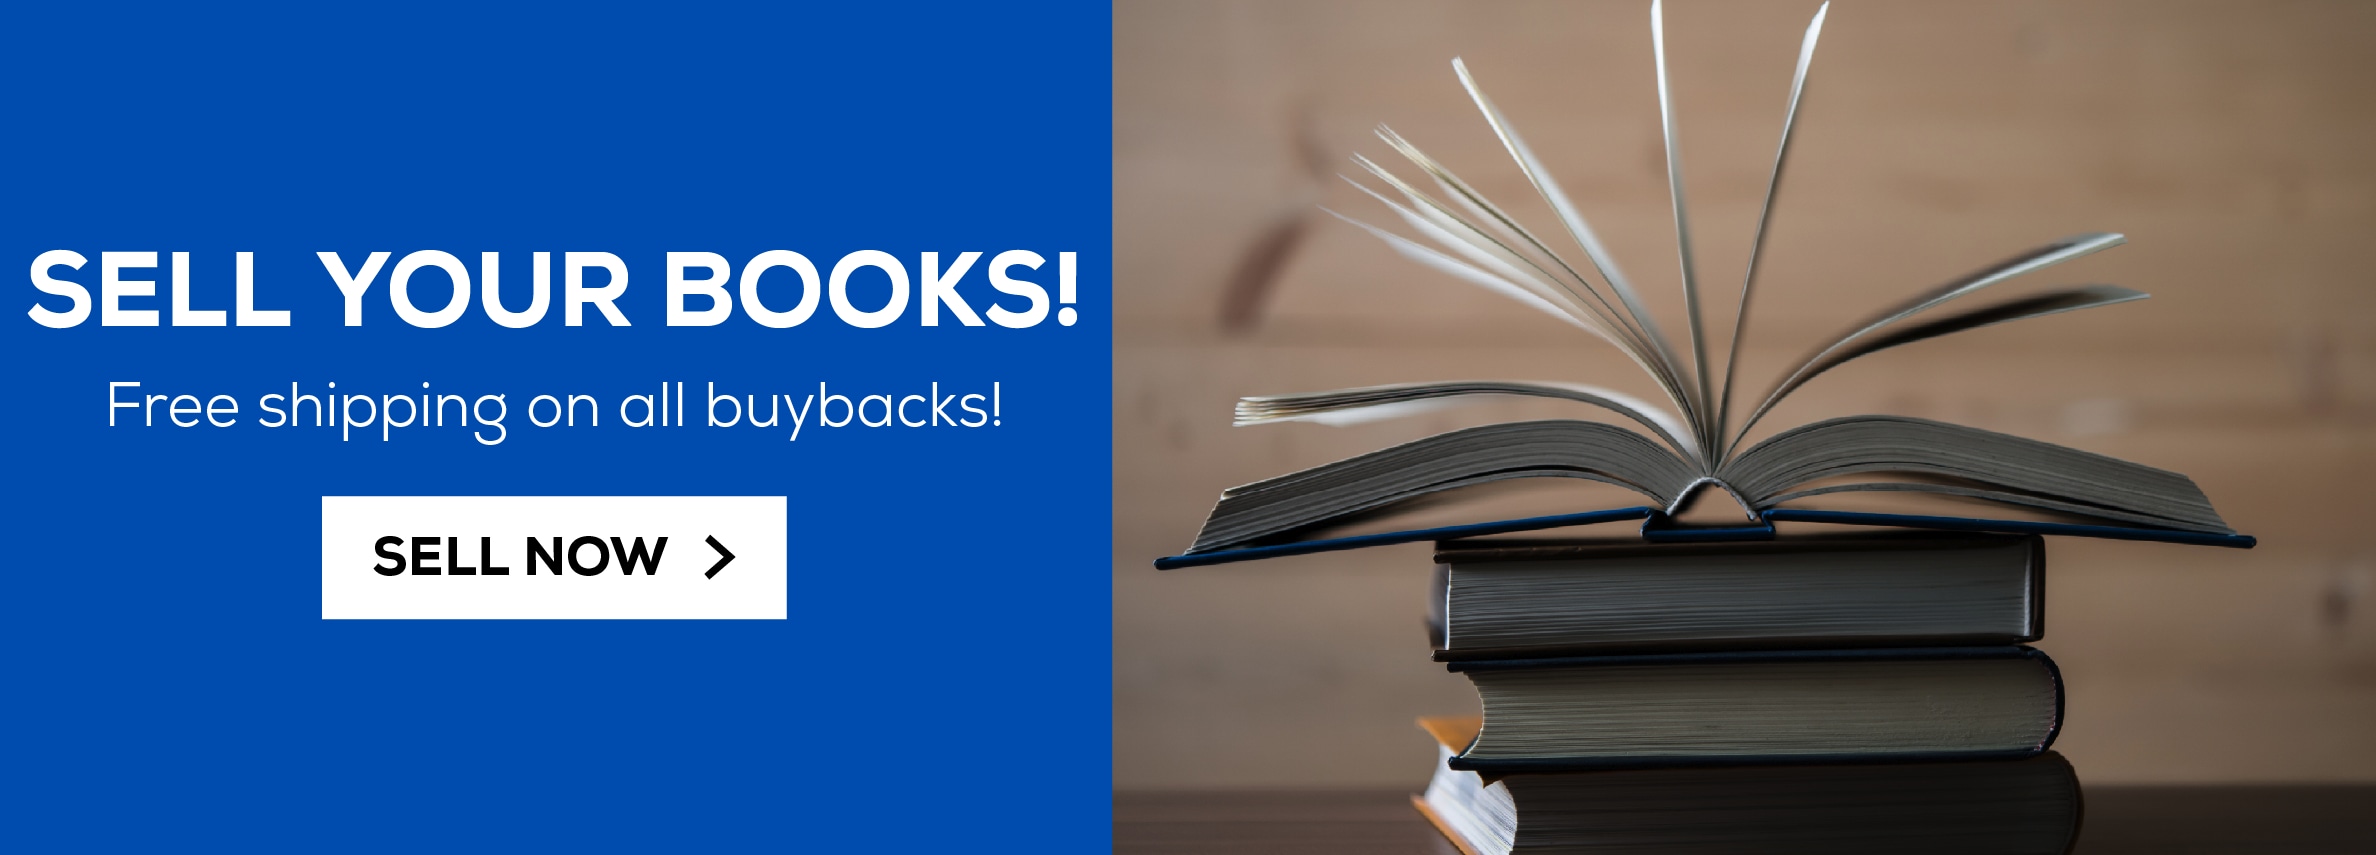 Sell your books! free shipping on all buybacks! Sell now